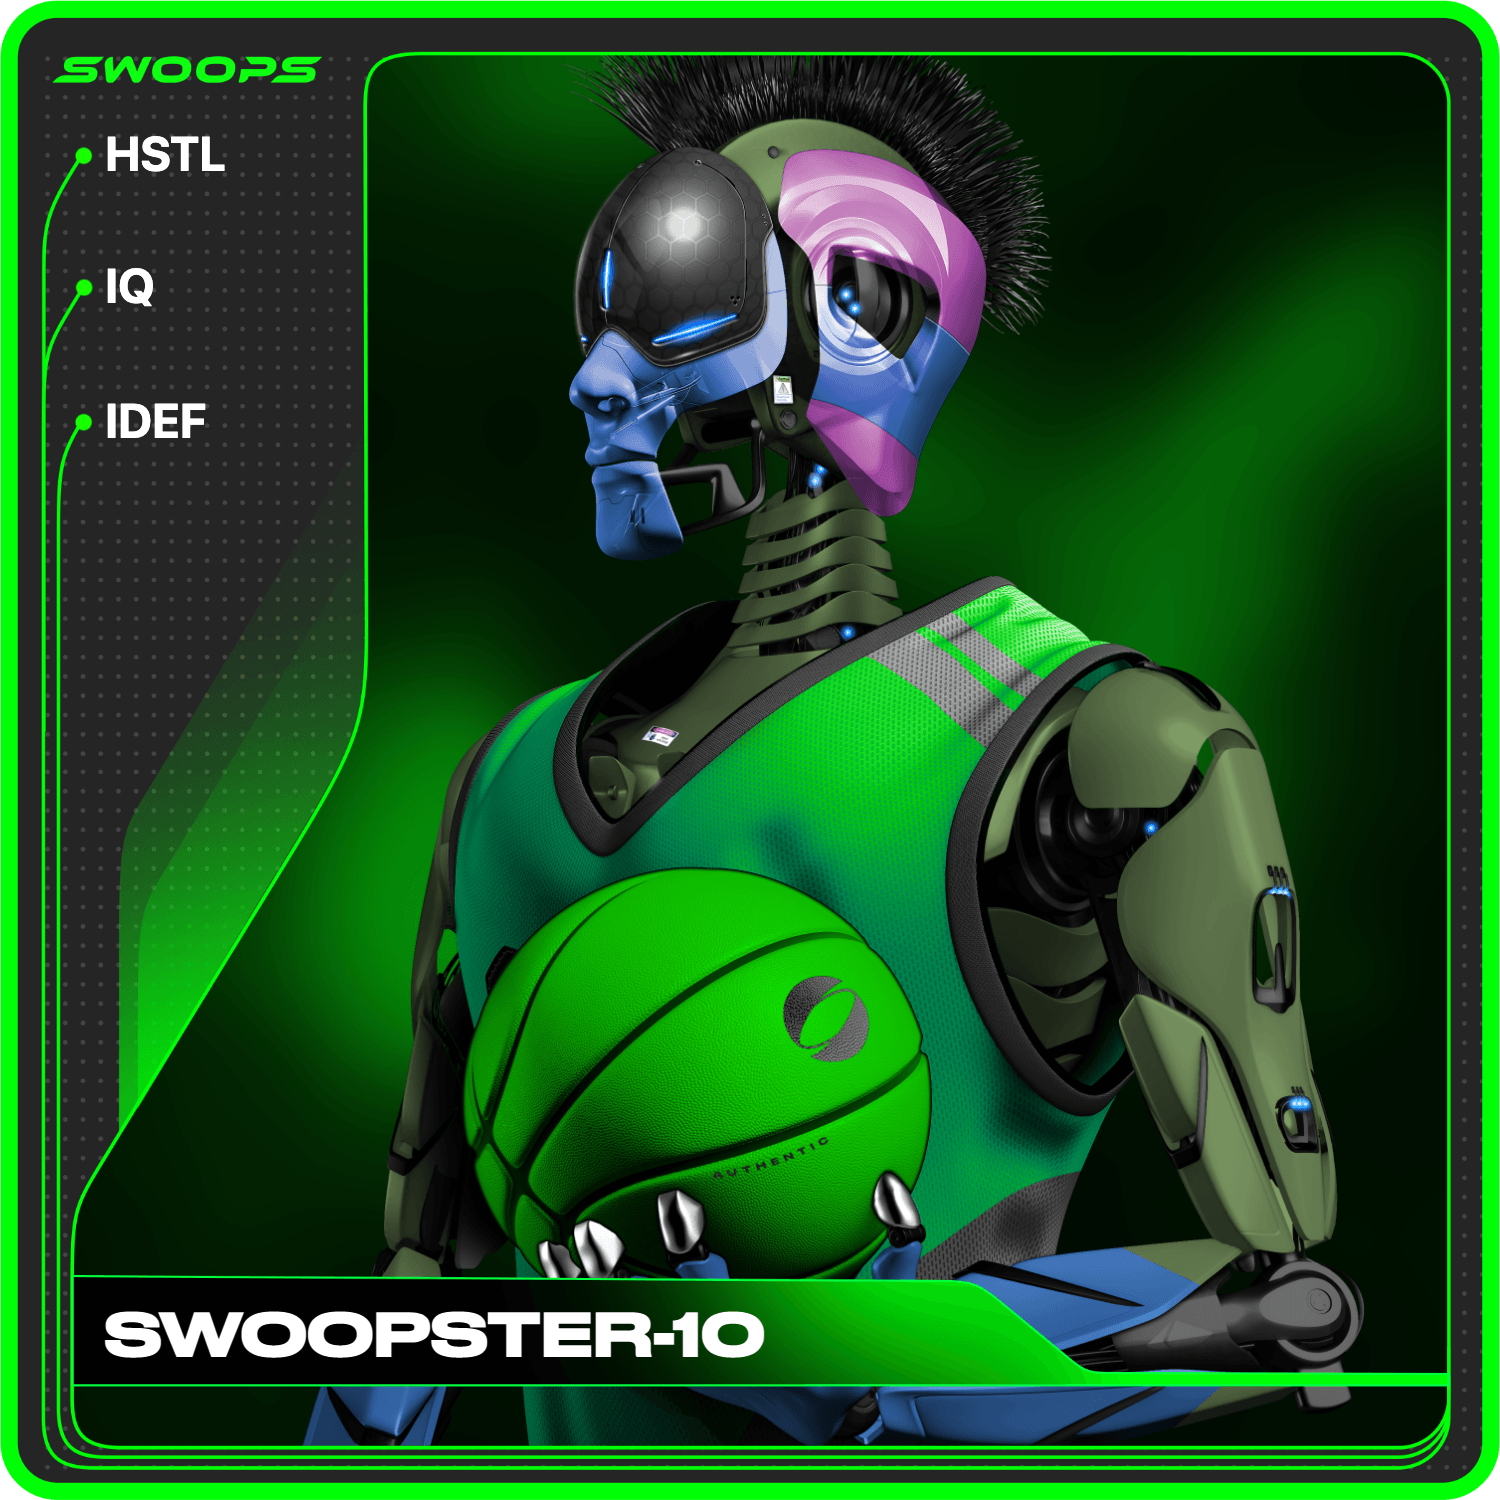 SWOOPSTER-10